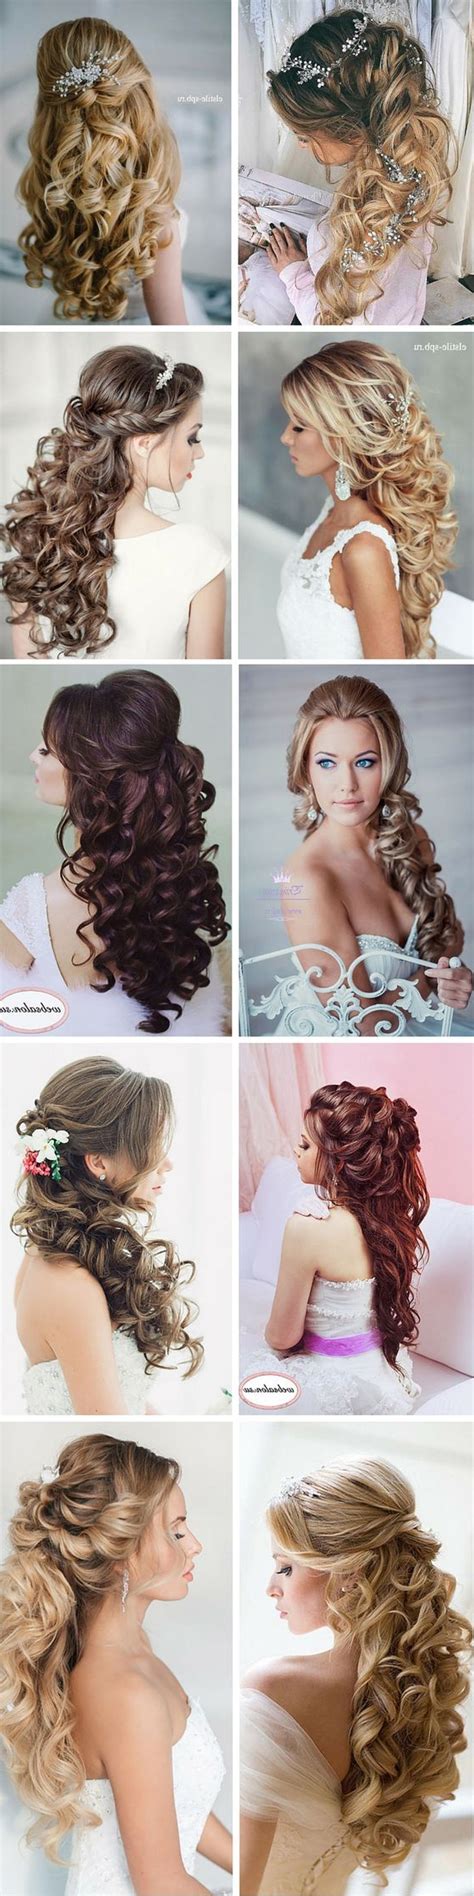 Scroll down to see 21 wedding hairstyles for curly hair you'll fall in love with immediately. 100+ Romantic Long Wedding Hairstyles 2019 - Curls, Half ...